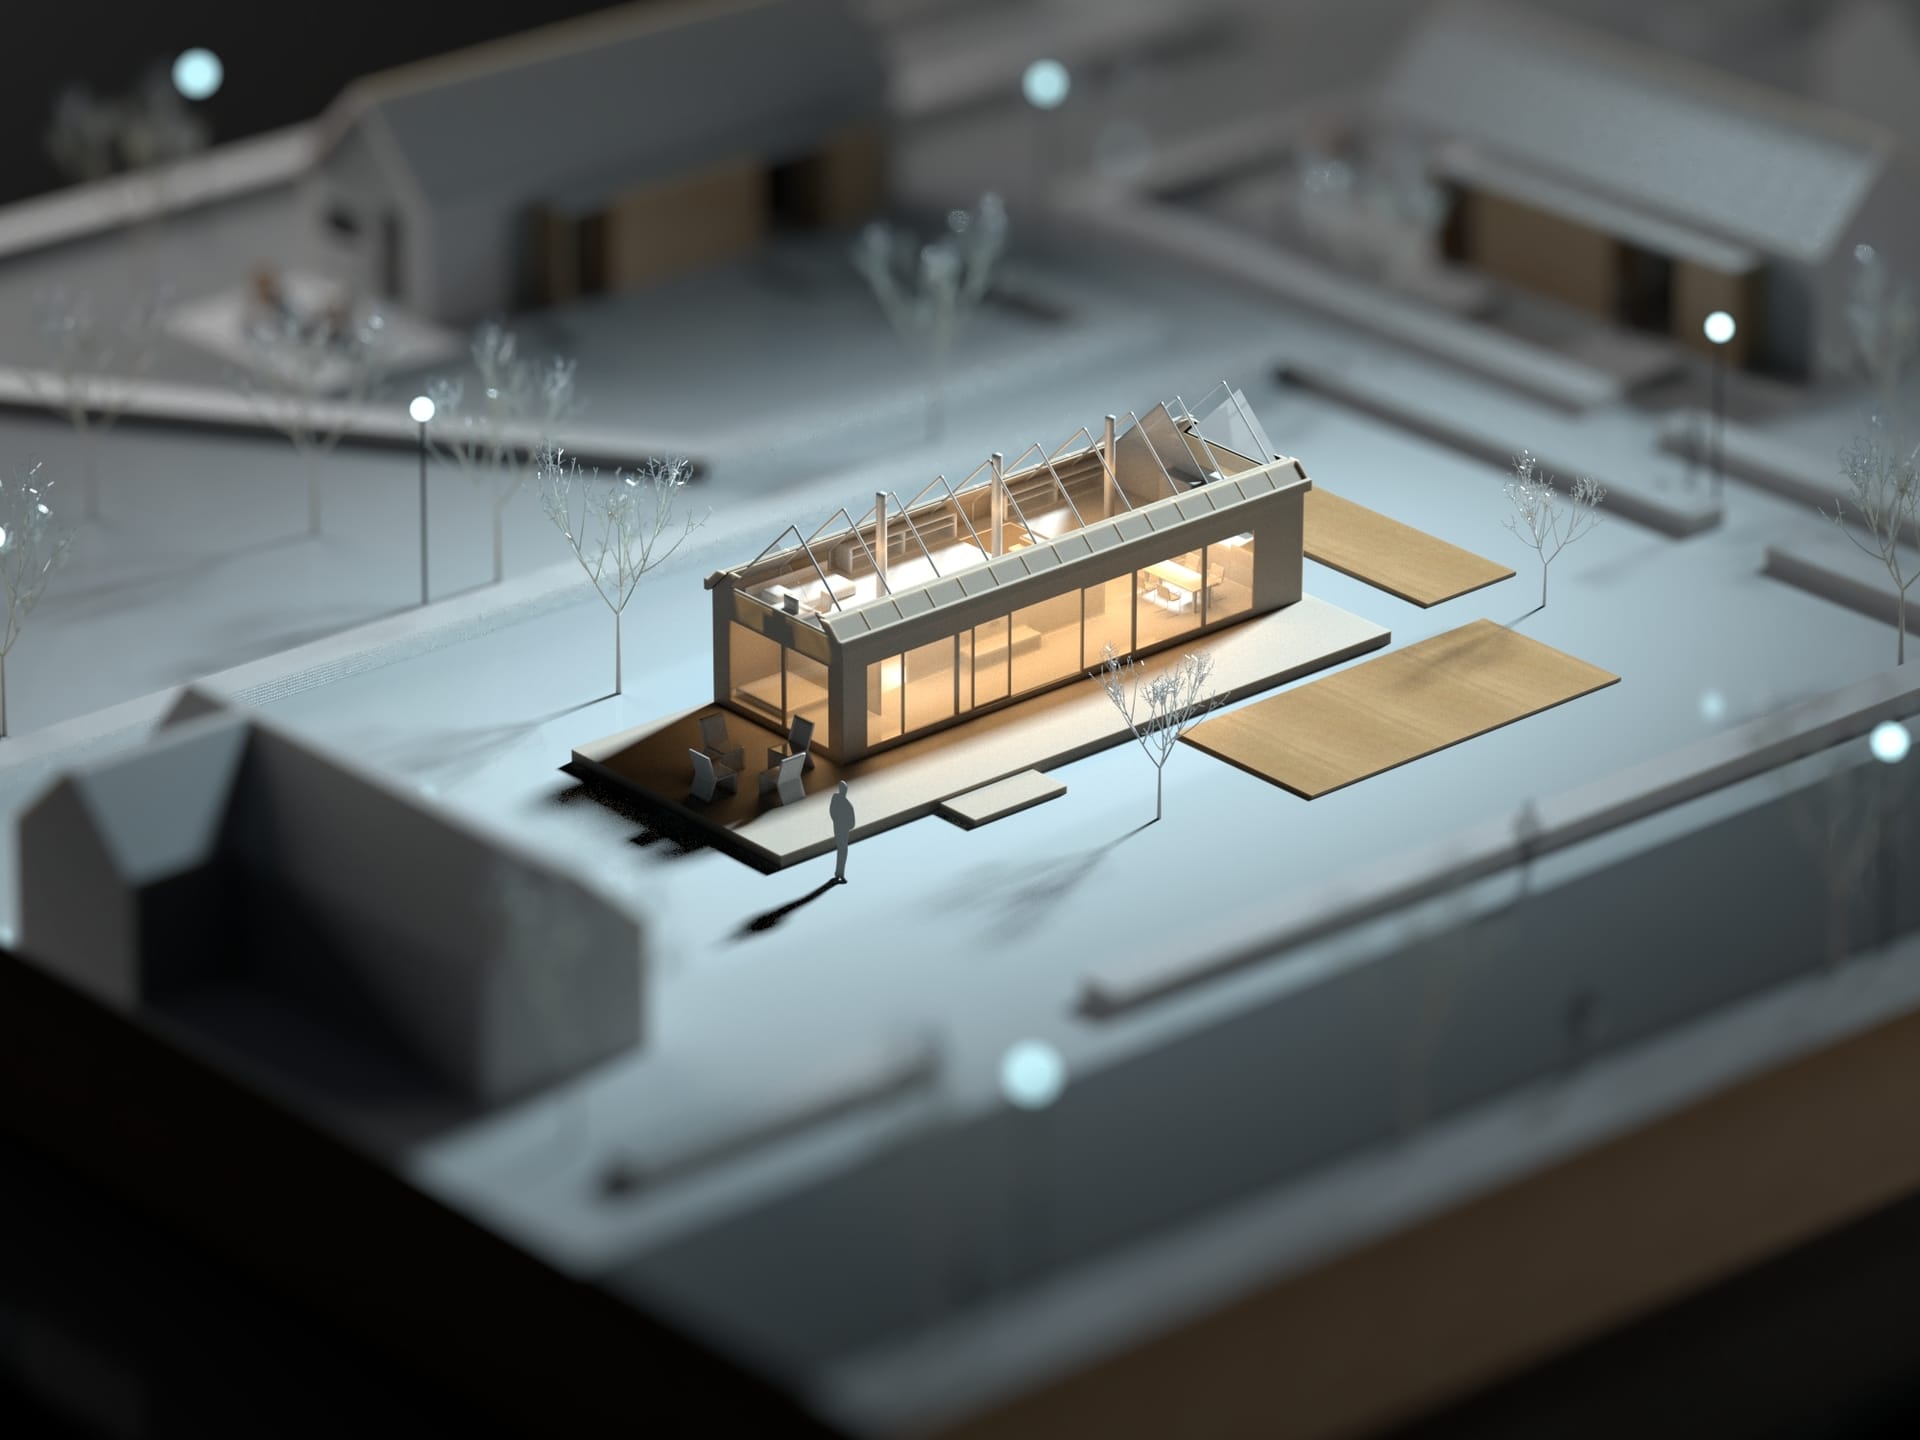 How To Render An Architectural Scale Model In V-Ray For SketchUp